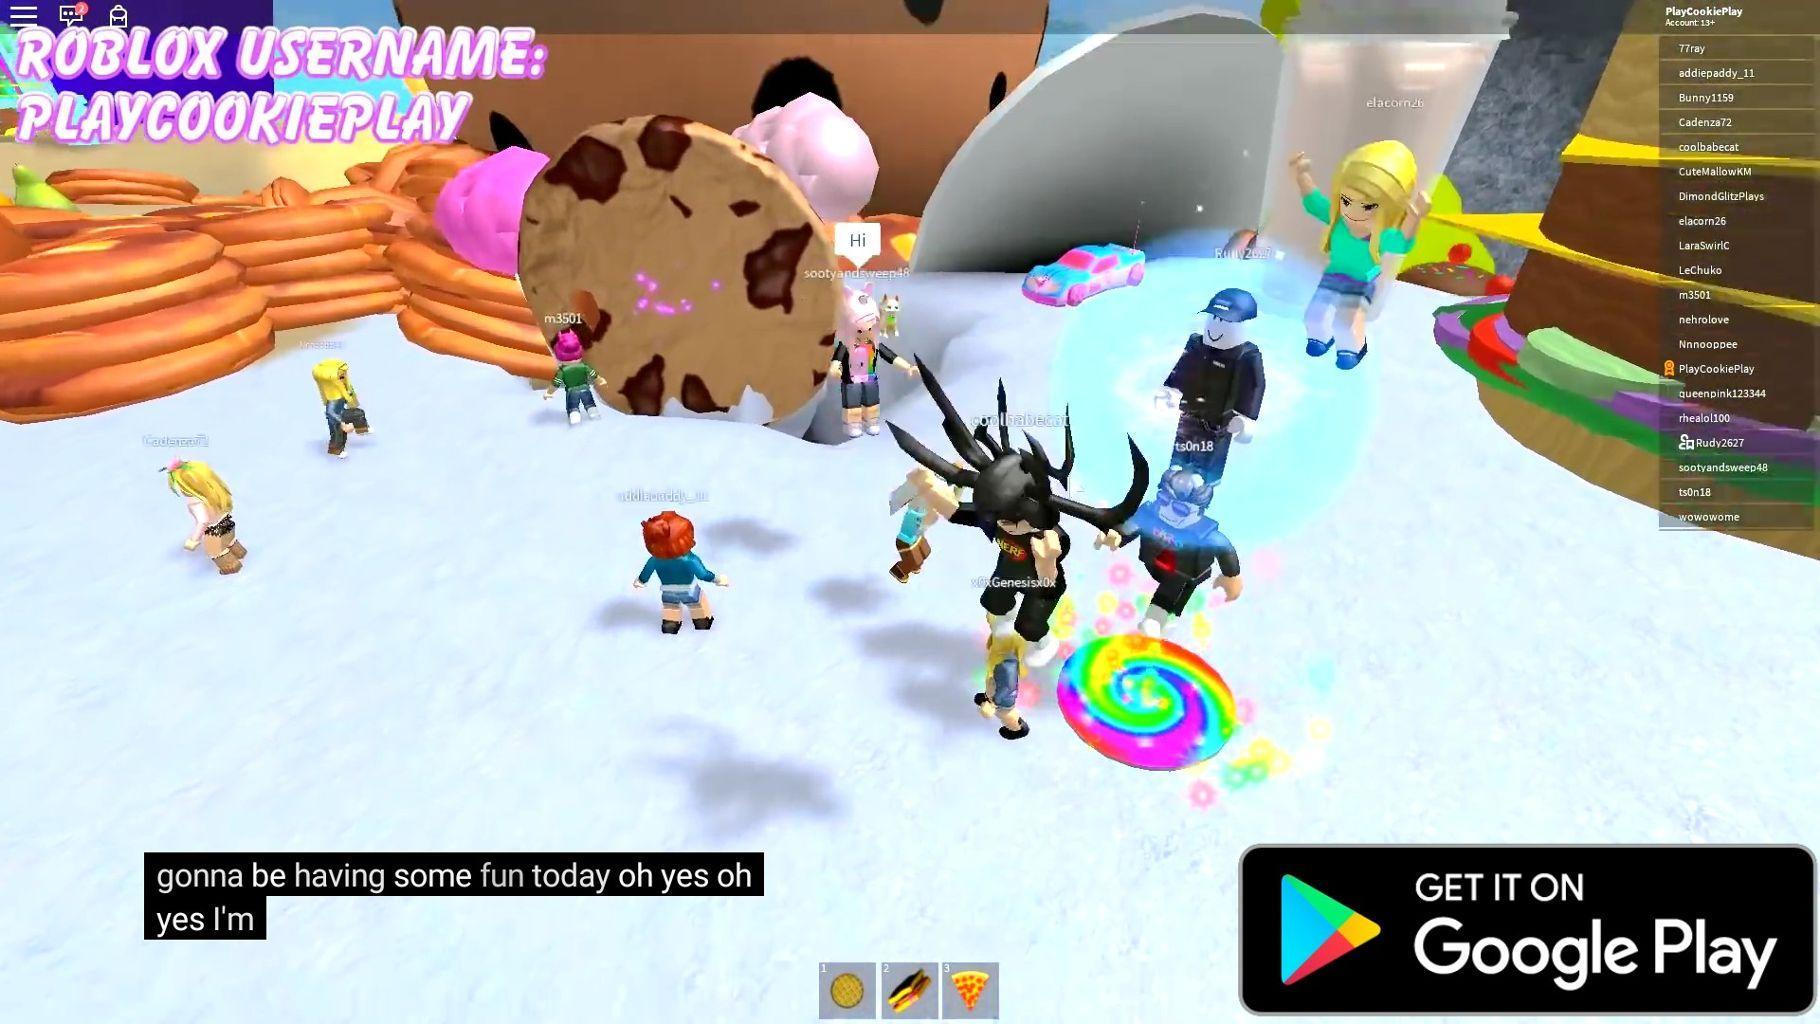 Guide For Cookie Swirl C Roblox For Android Apk Download - favorite the c roblox games